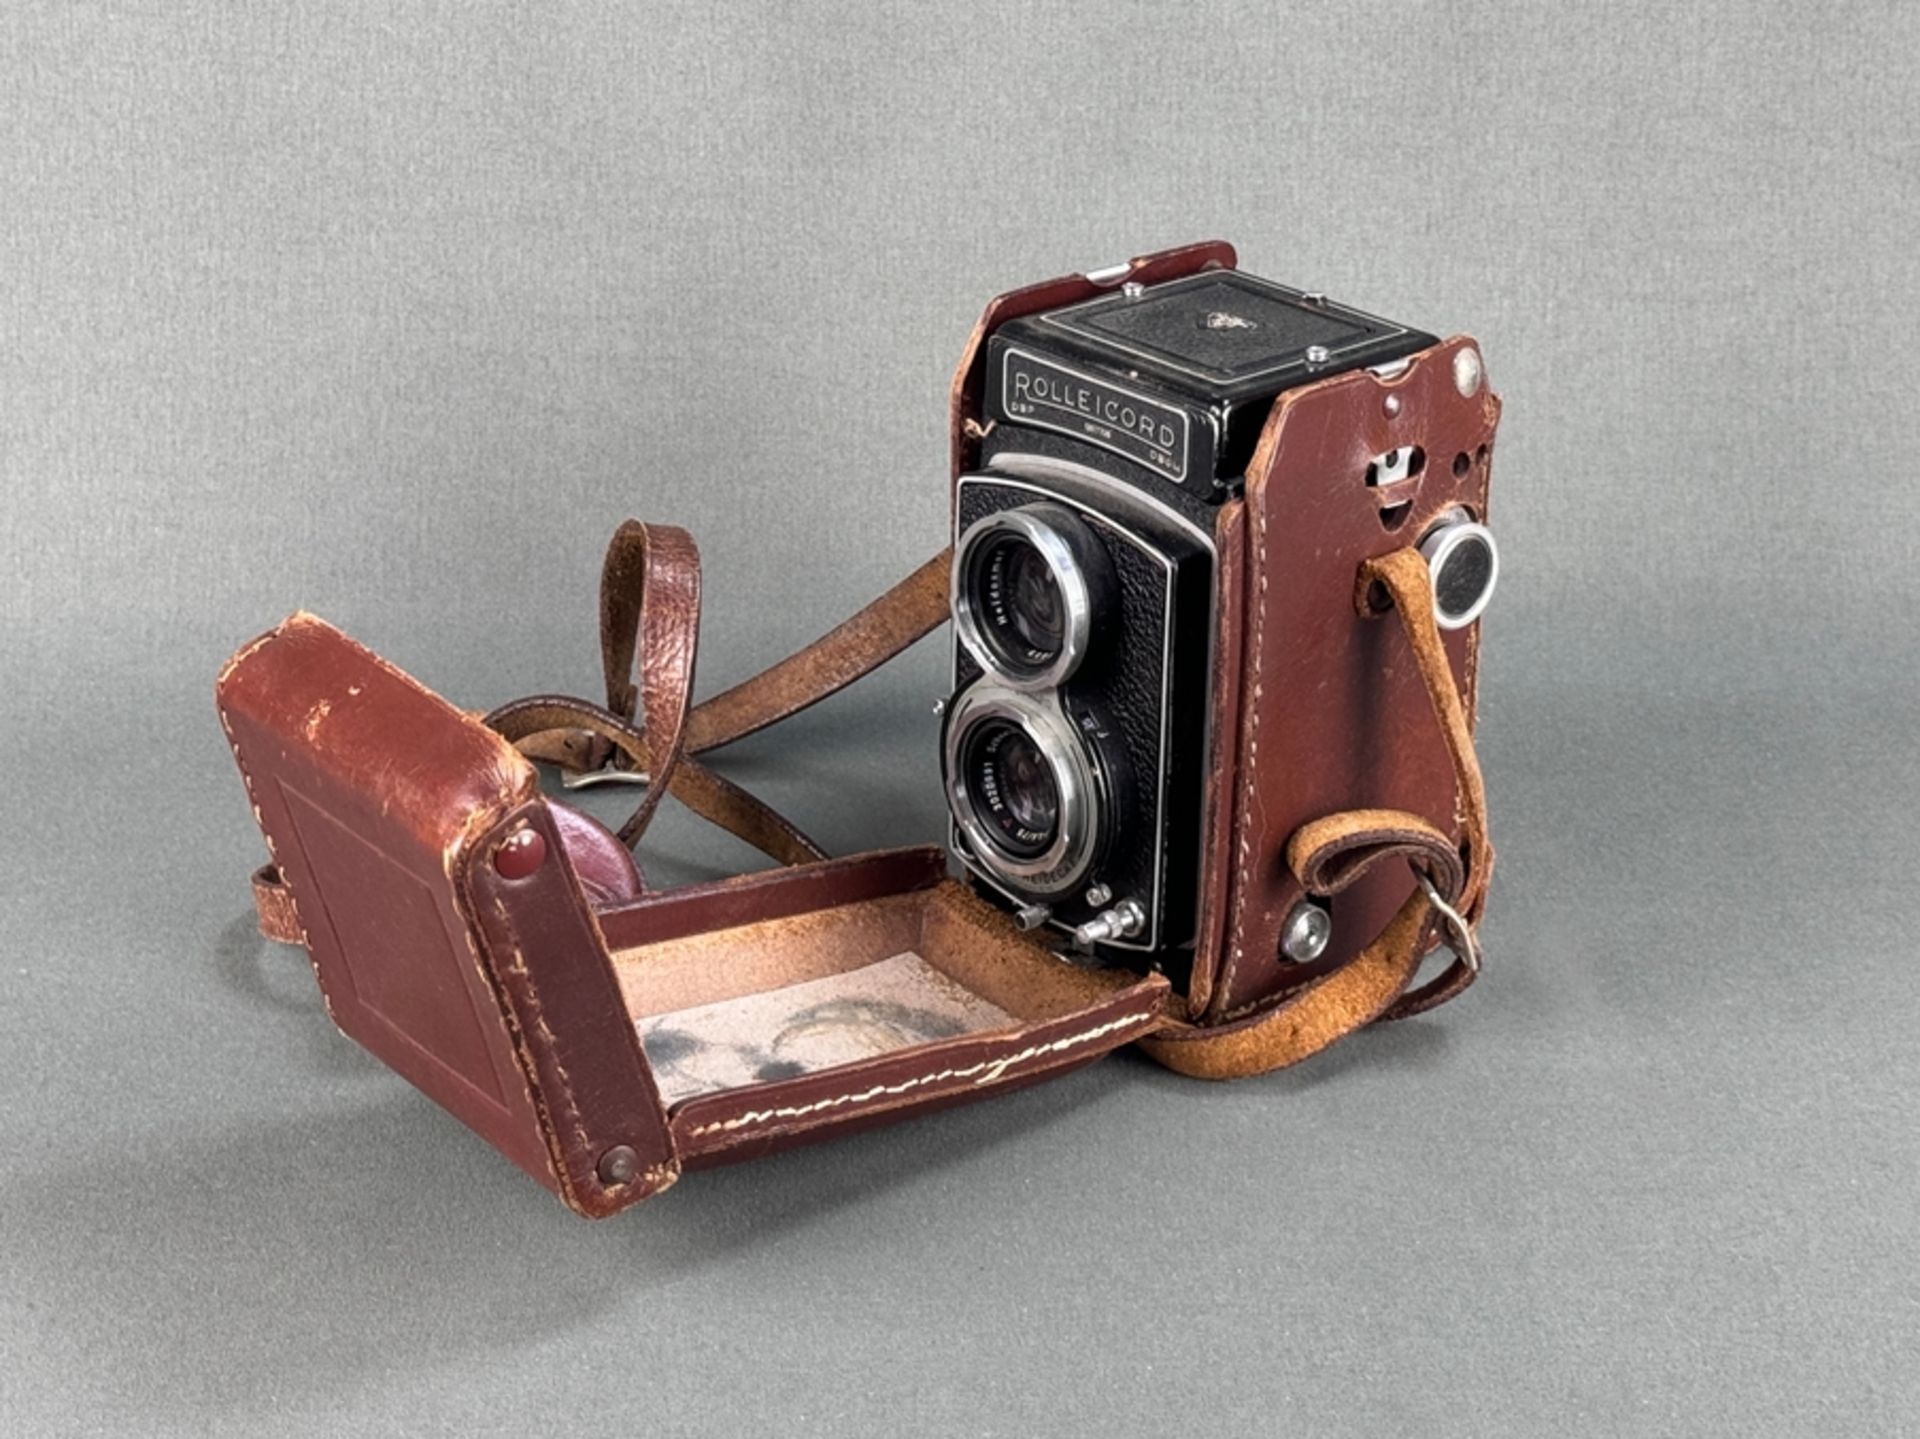 Two-lens roll film camera "Rolleicord", in original leather case, function not tested *1247/1350/00